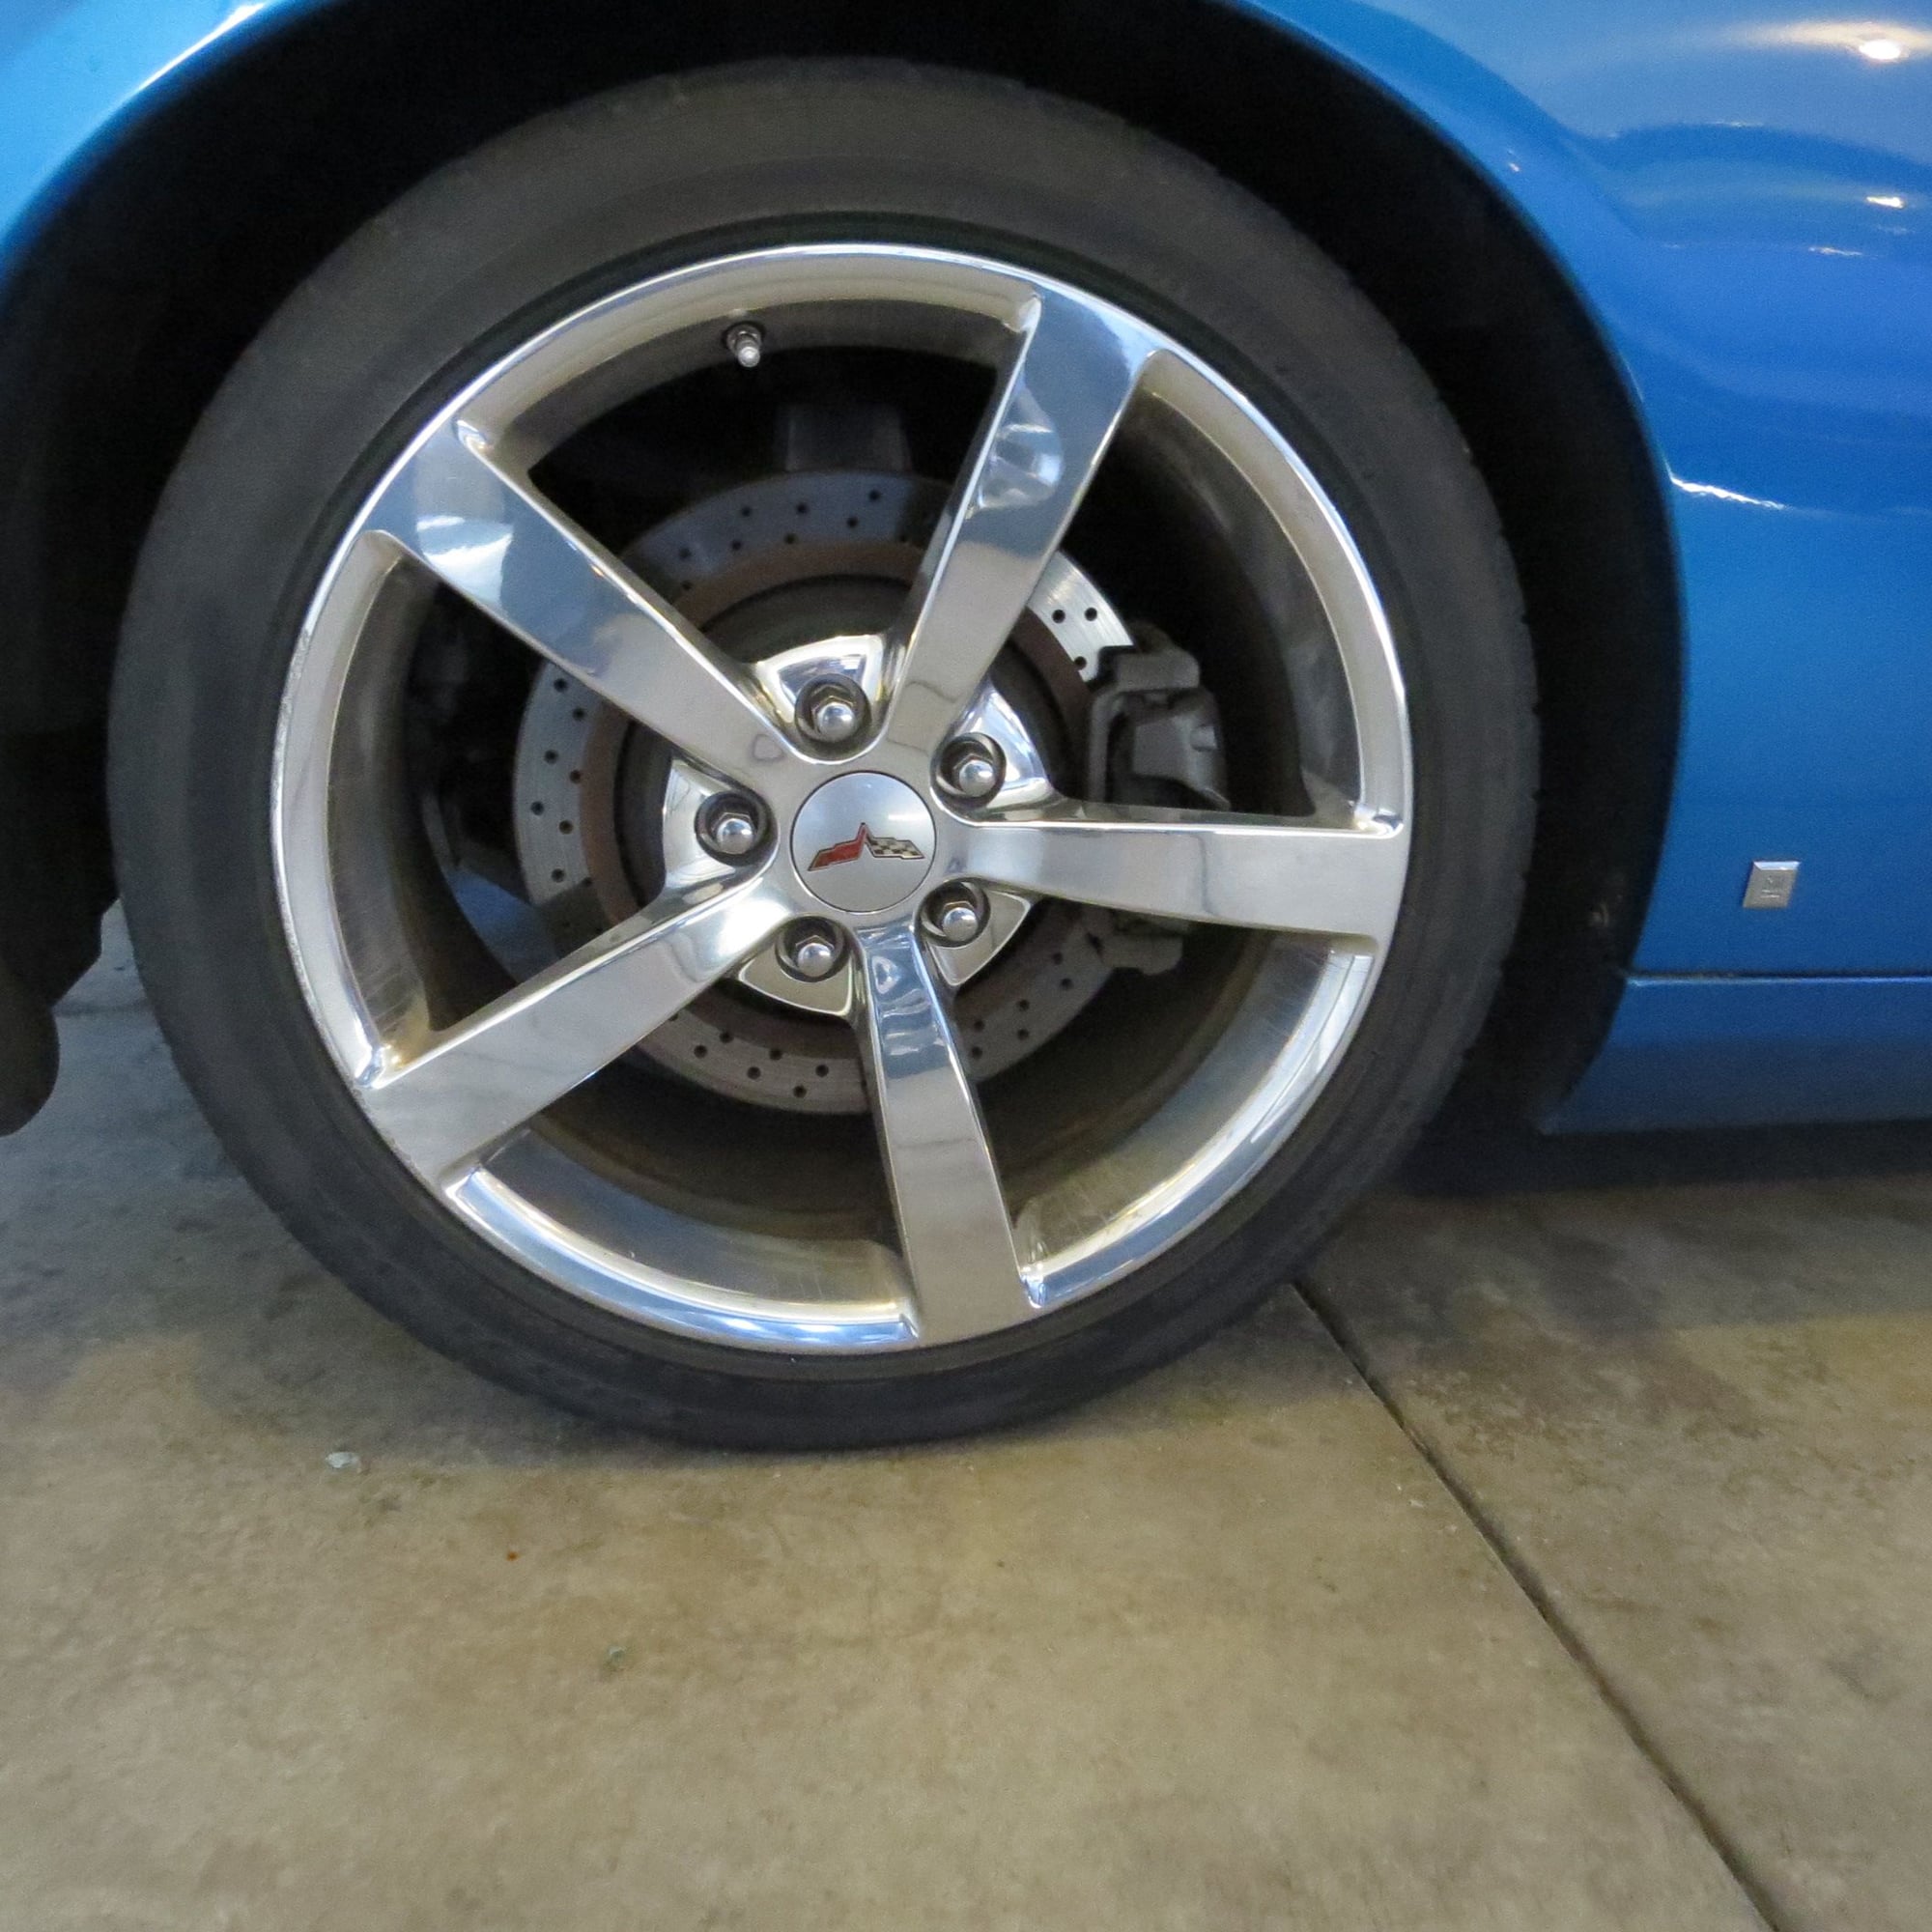 Why are these wheels called Gumbys? CorvetteForum Chevrolet